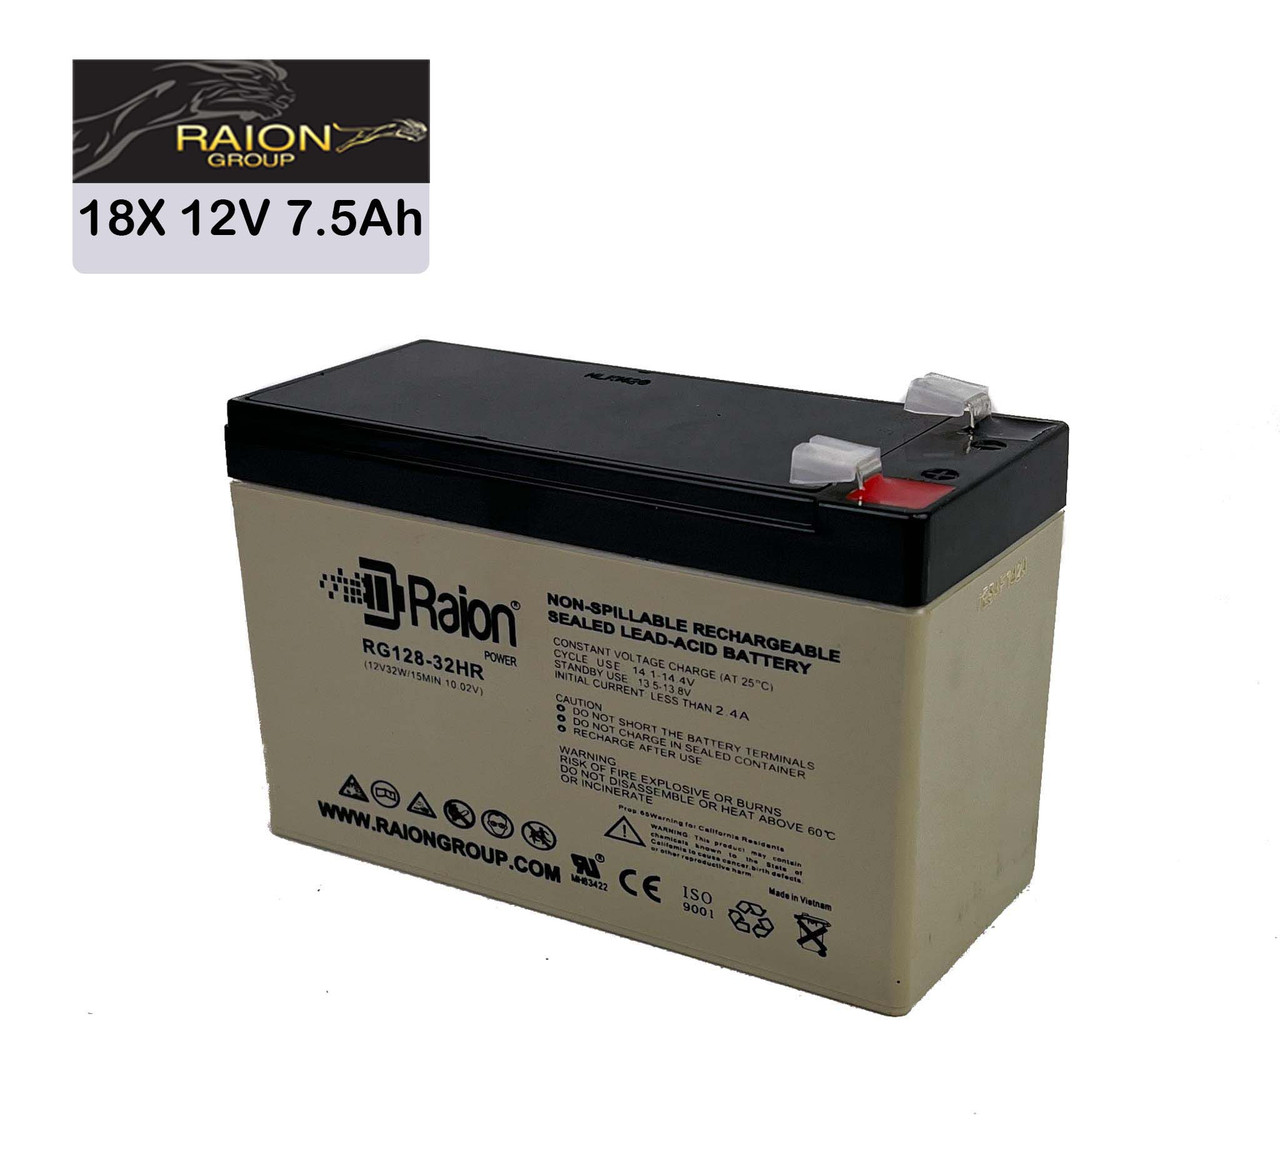 Raion Power 12V 7.5Ah High Rate Discharge UPS Batteries for Toshiba UC3G2L060T695N - 18 Pack